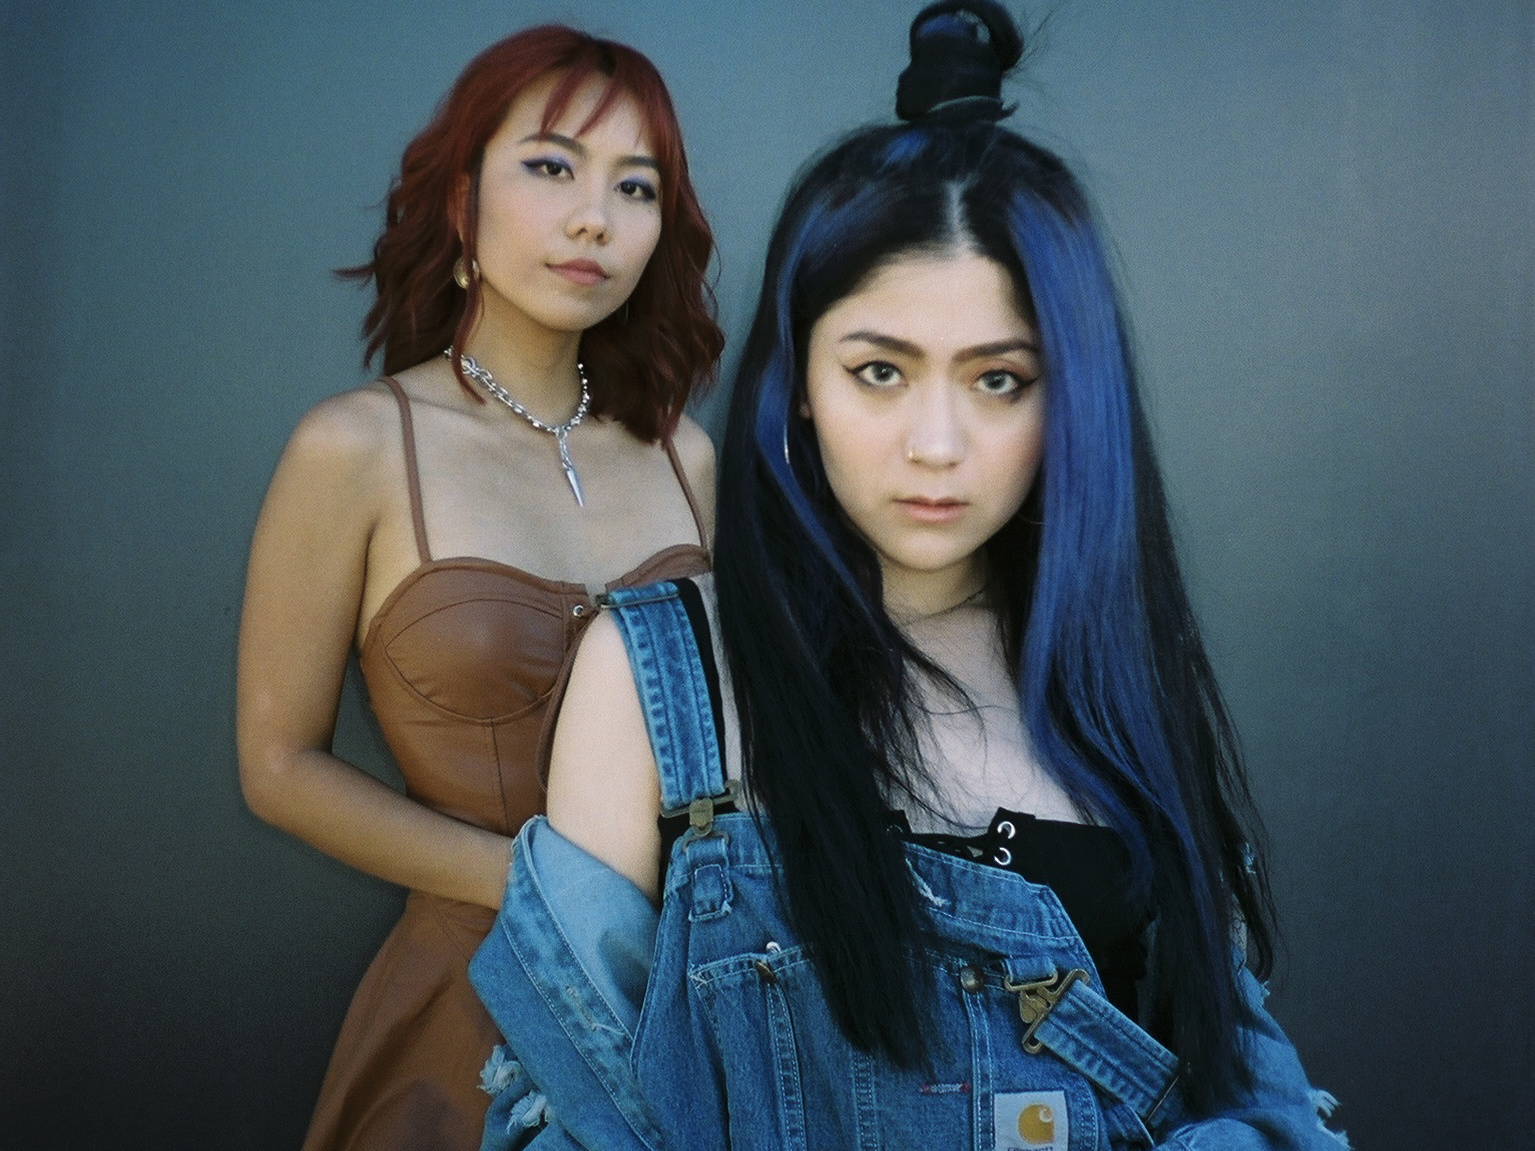 Powerhouse Asian Female Producers – RayRay and JVNA, Join Forces for Their Emotive but Hard-Hitting Bilingual Collaboration “Butterfly”